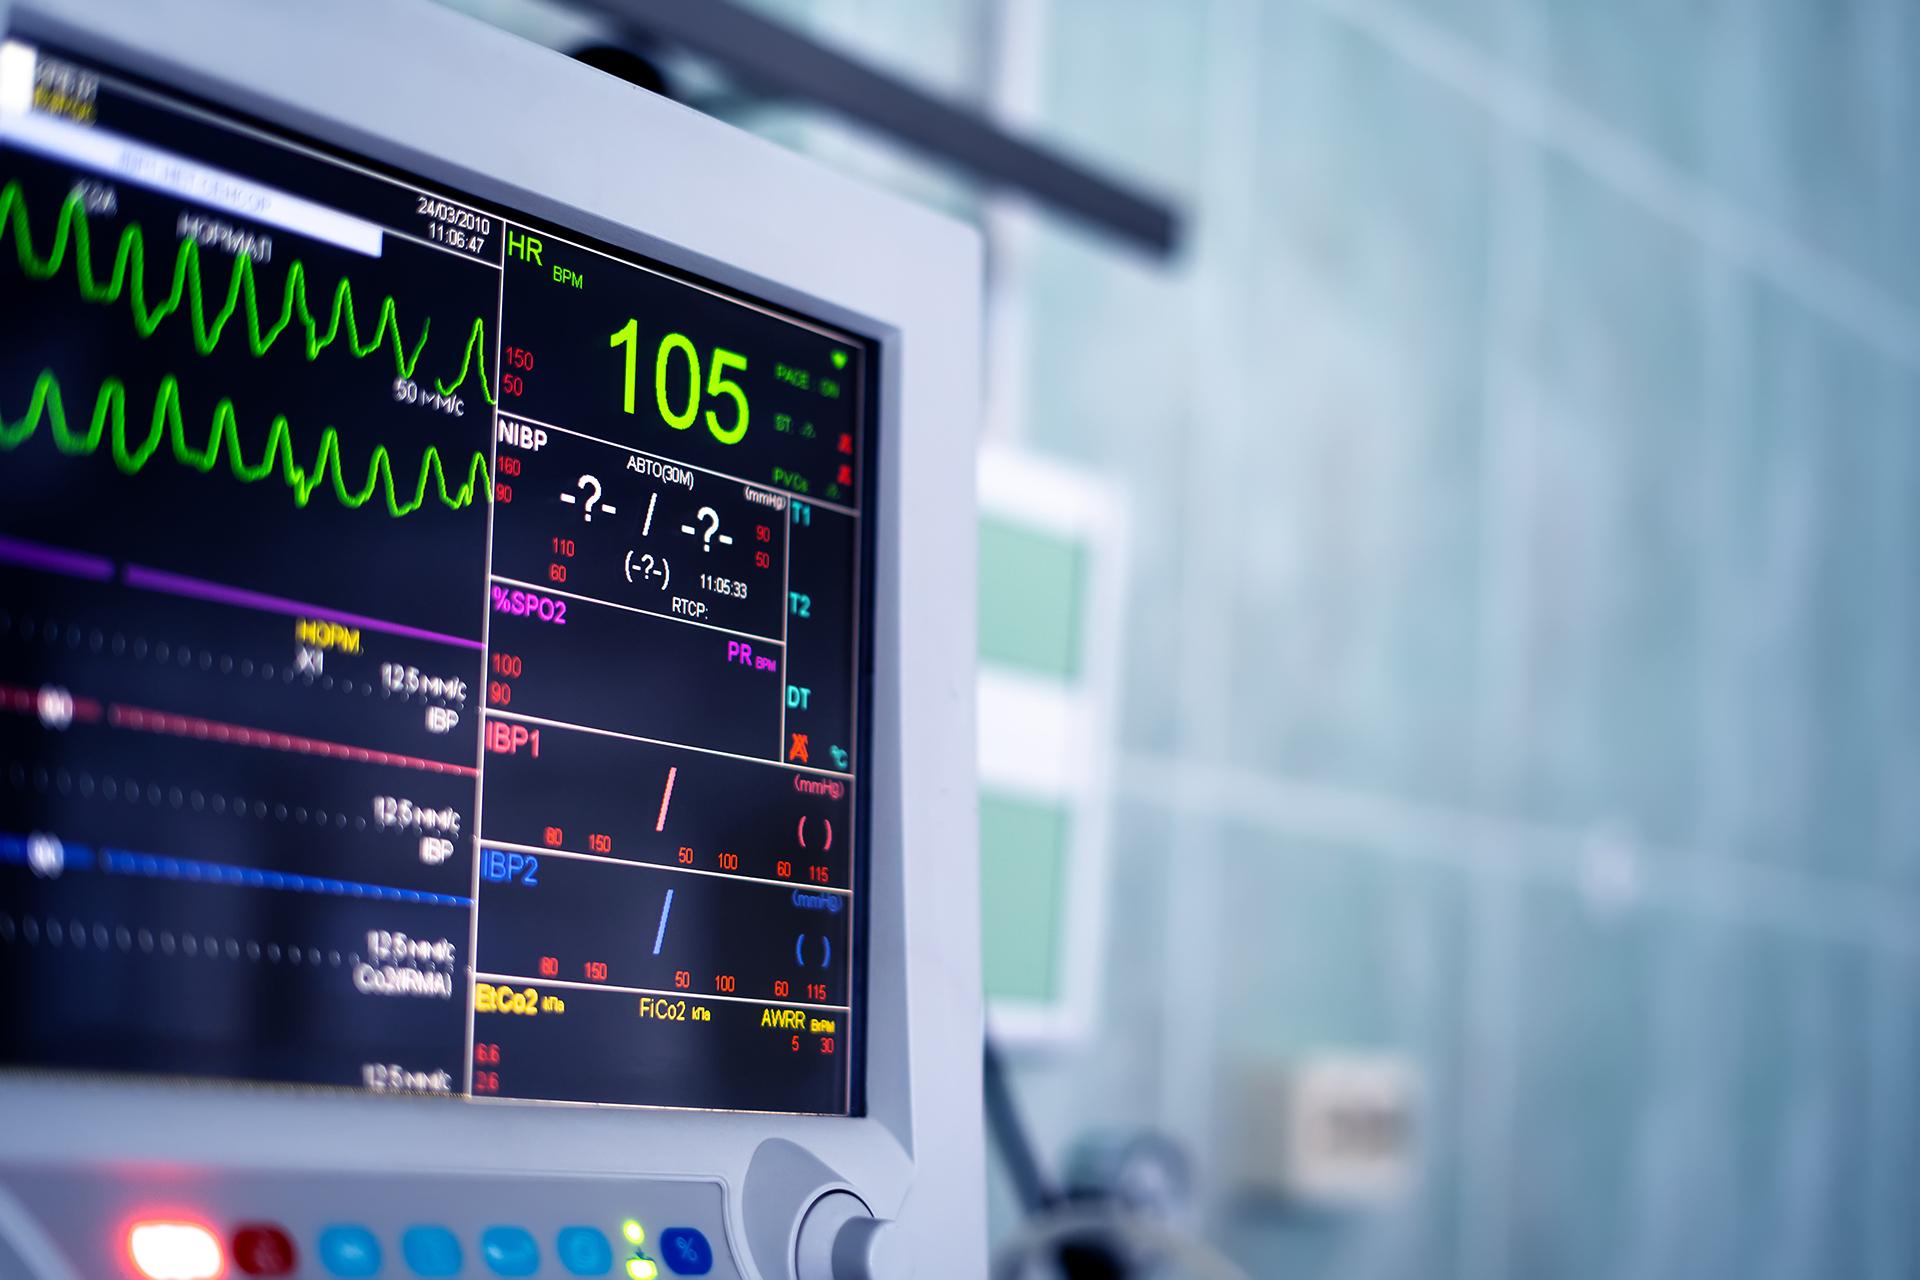 Why are Electrocardiogram Heart Tests Done? What are the Types and Purposes?